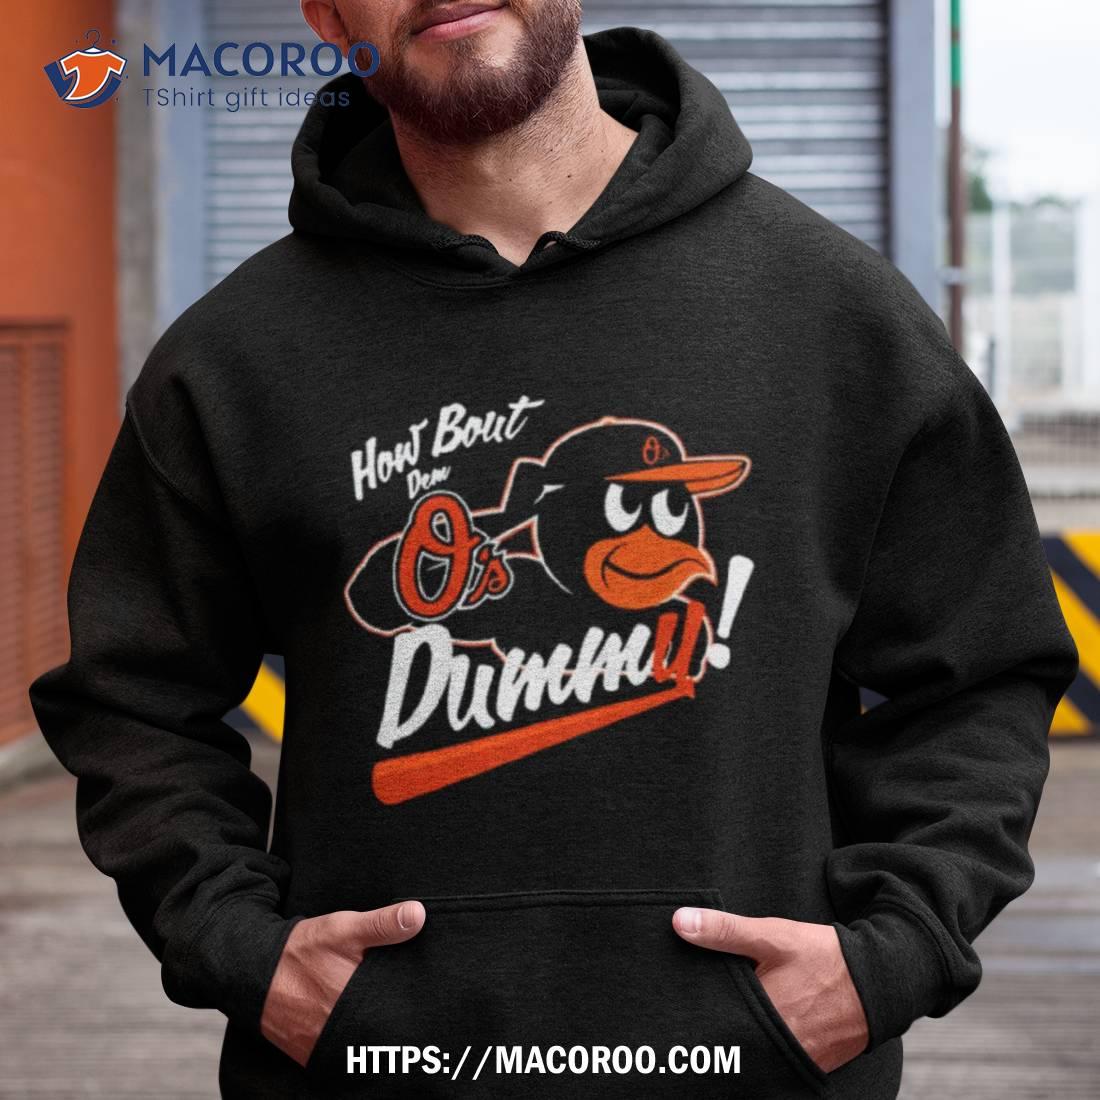 Baltimore Orioles How About Dem O's Dummy Shirt